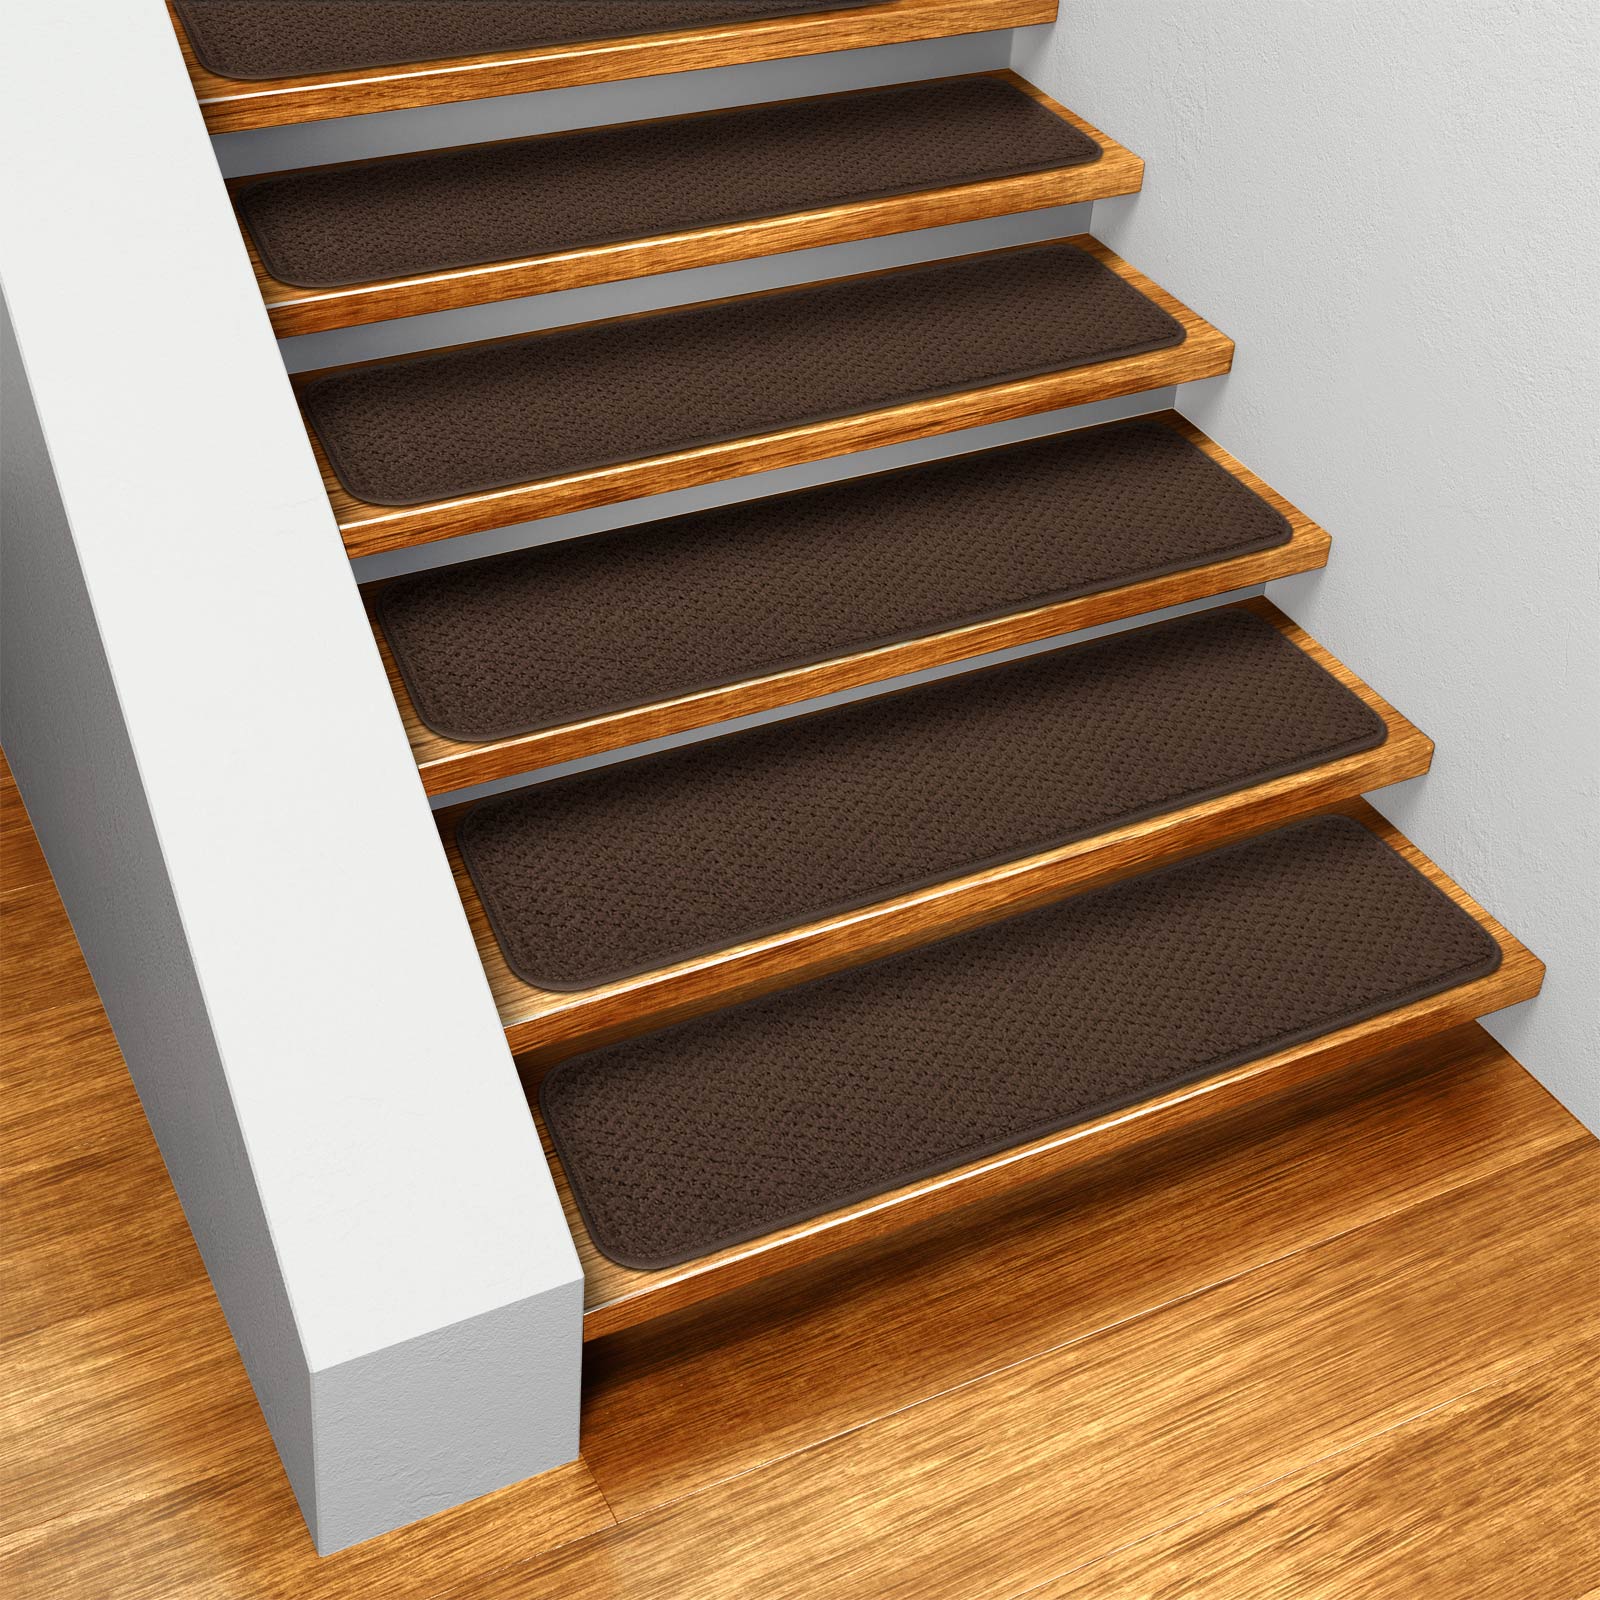 House, Home and More Set of 15 Skid-resistant Carpet Stair Treads - Chocolate Brown - 8 In. X 23.5 In.